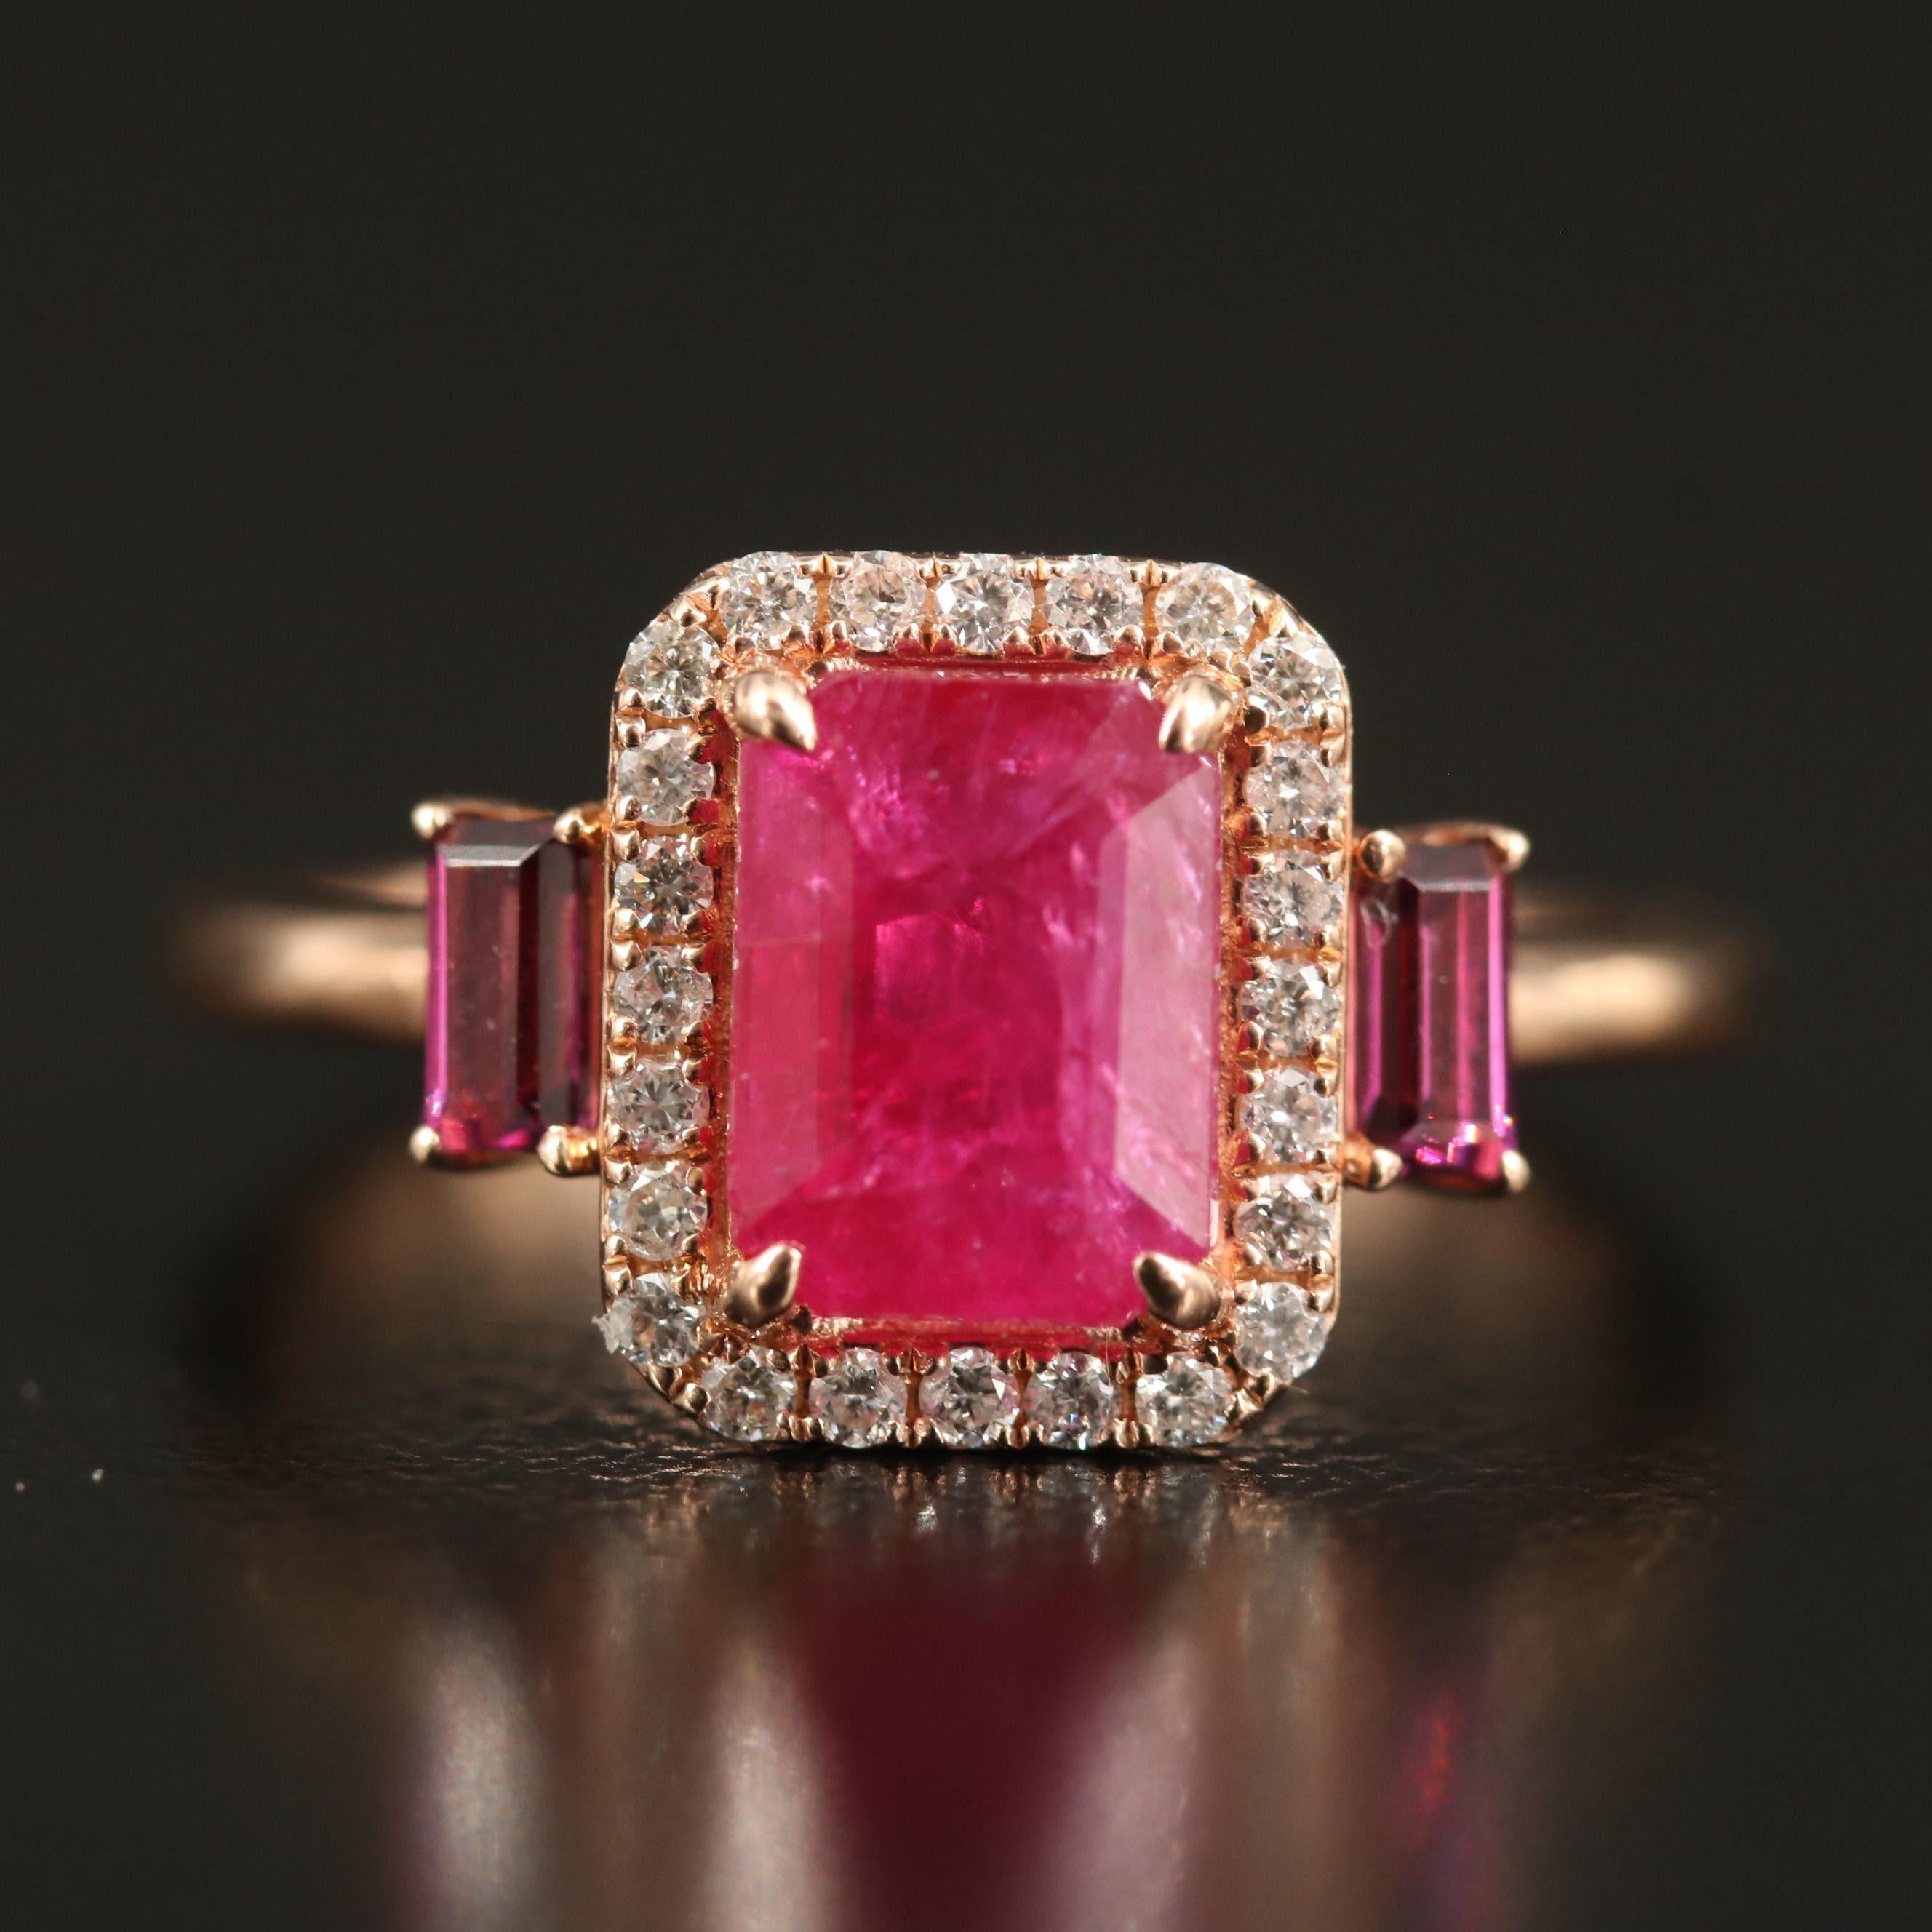 For Sale:  18K Gold 1.72 Carat Natural Ruby Diamond Antique Art Deco Style Engagement Ring 8